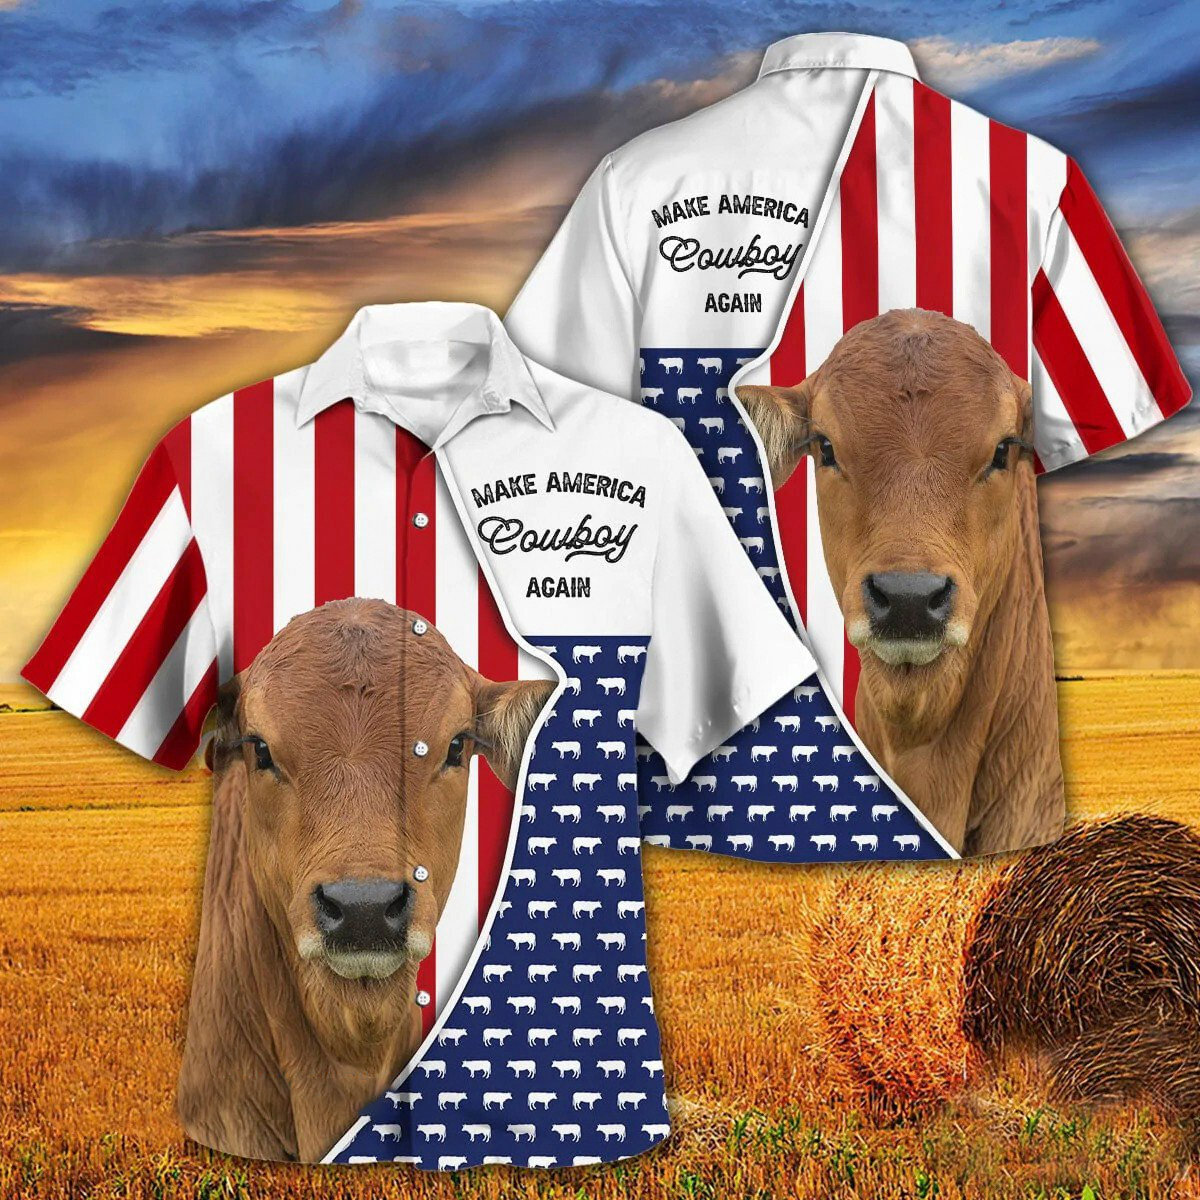 Independence Day Gelbvieh Cattle Make America Cowboy Again With American Flag Pattern Hawaii Hawaiian Shirt